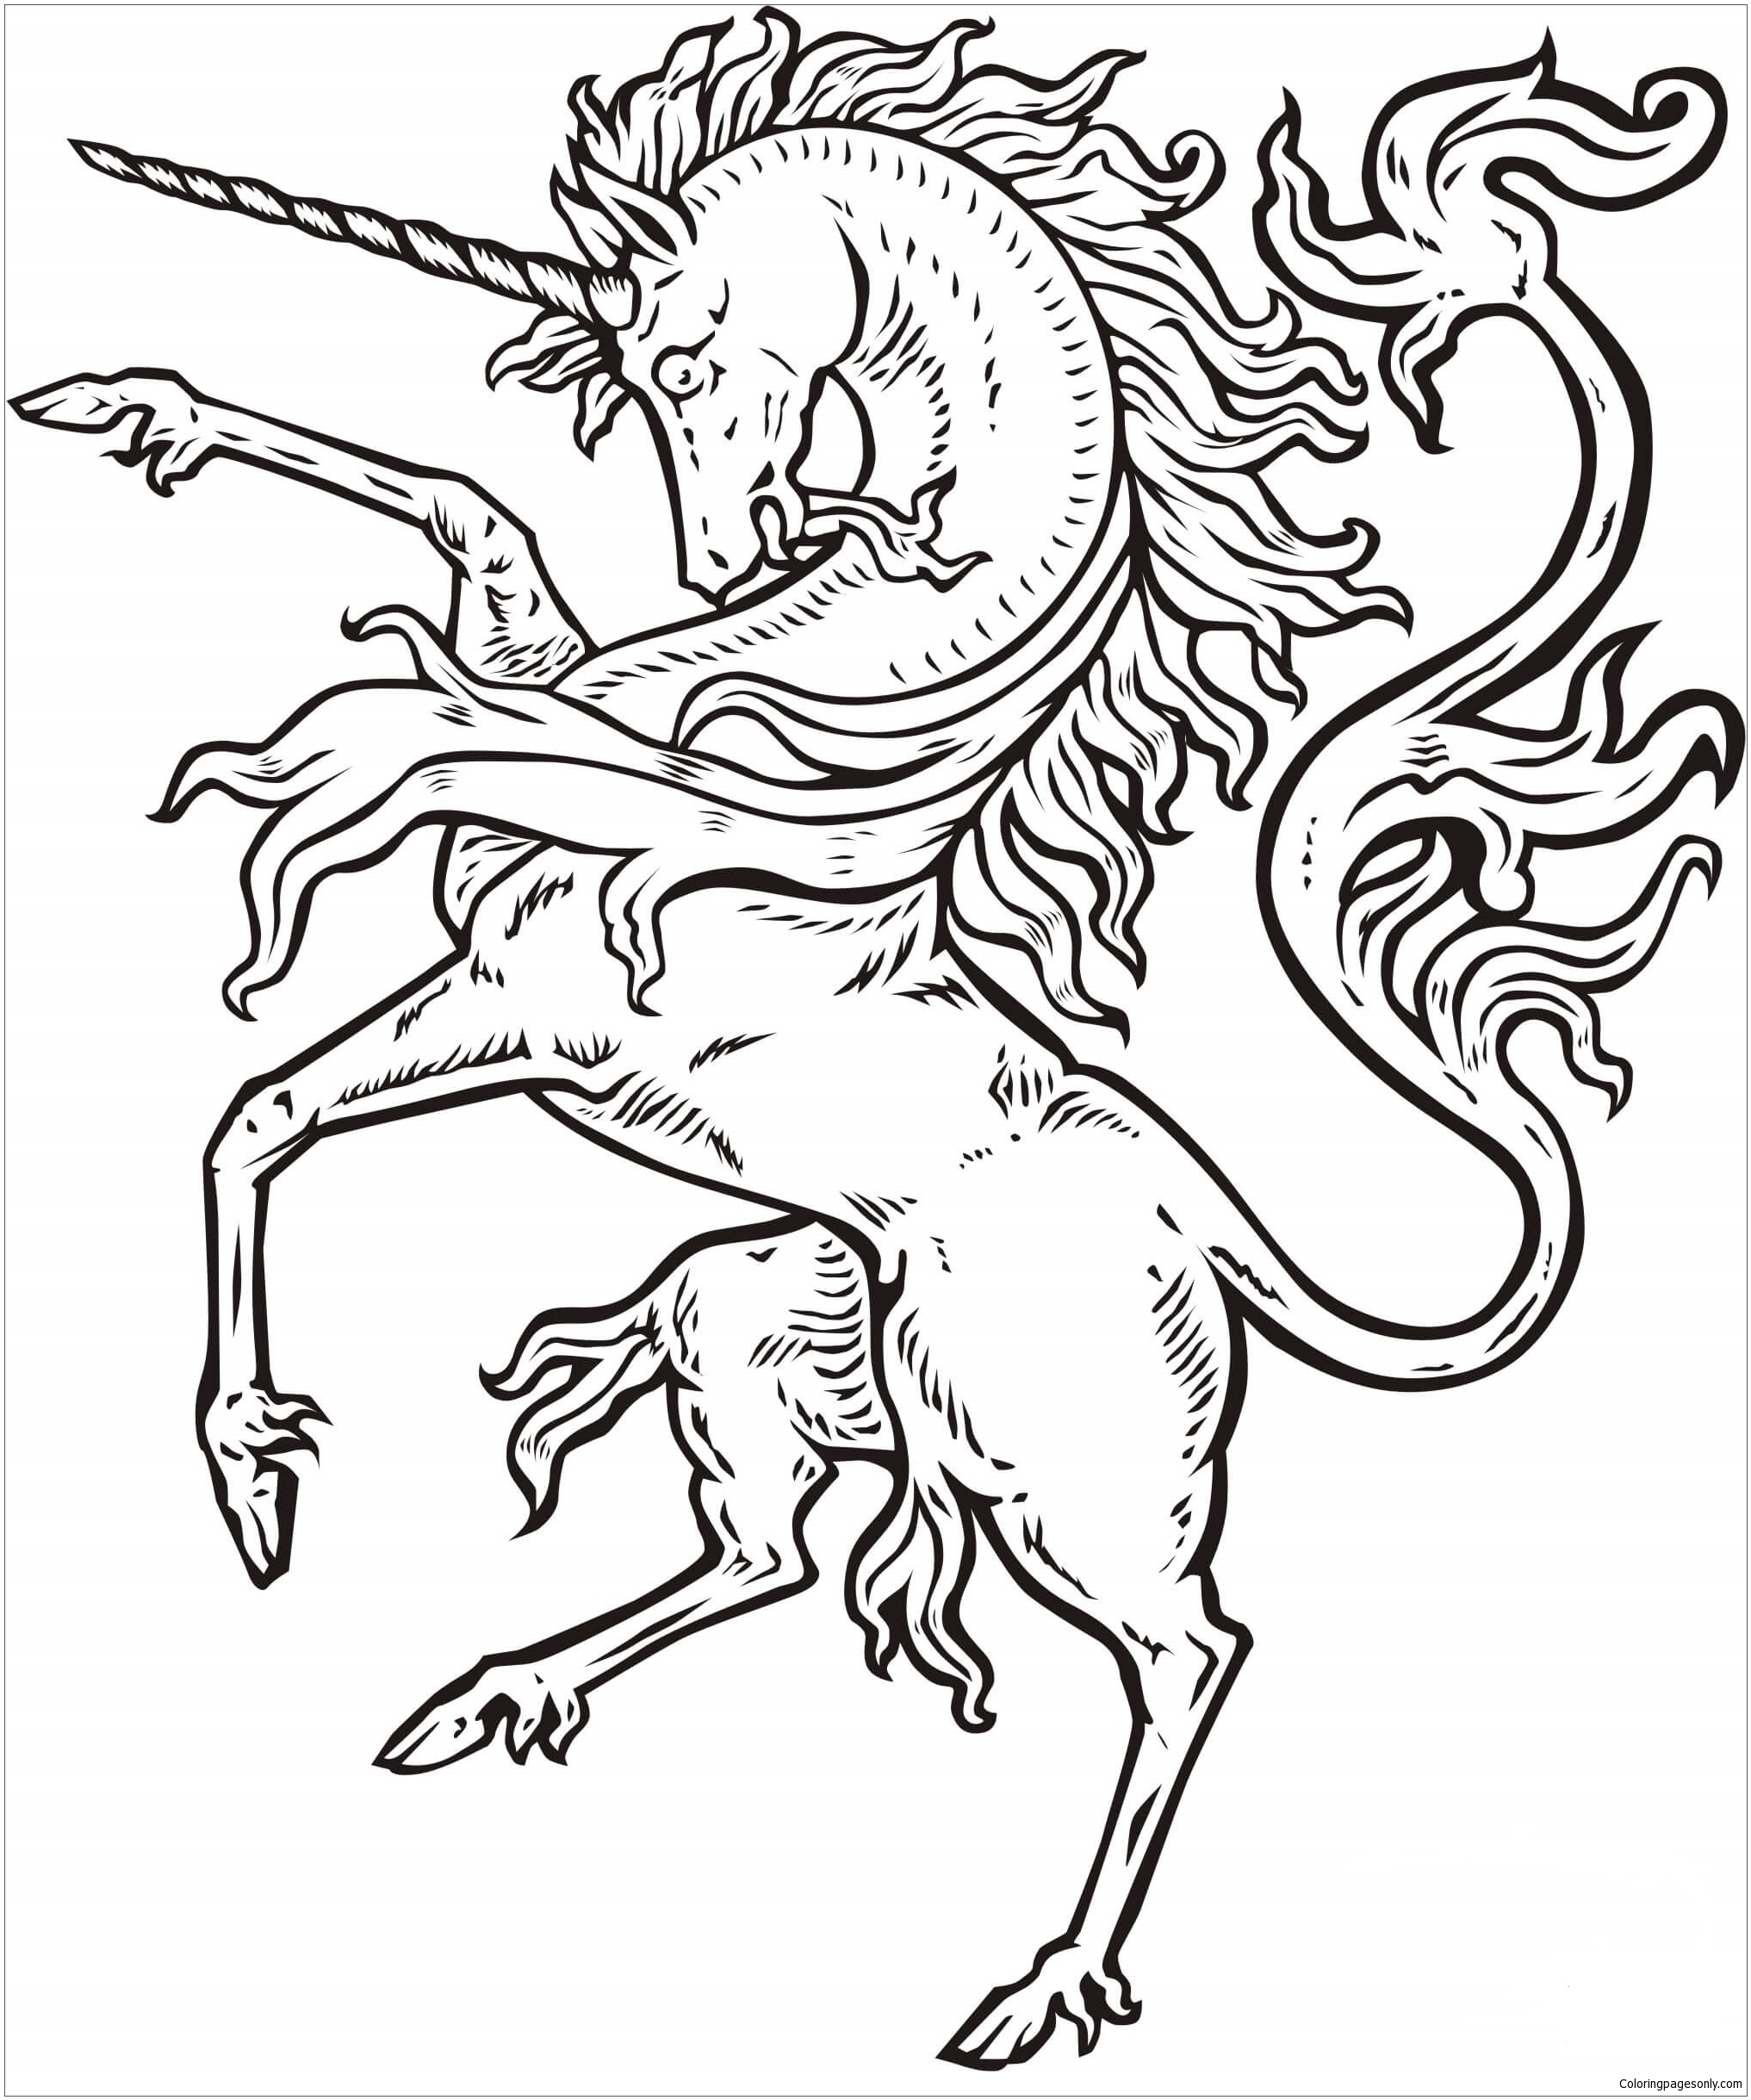 Unicorn Picture To Color from Unicorn